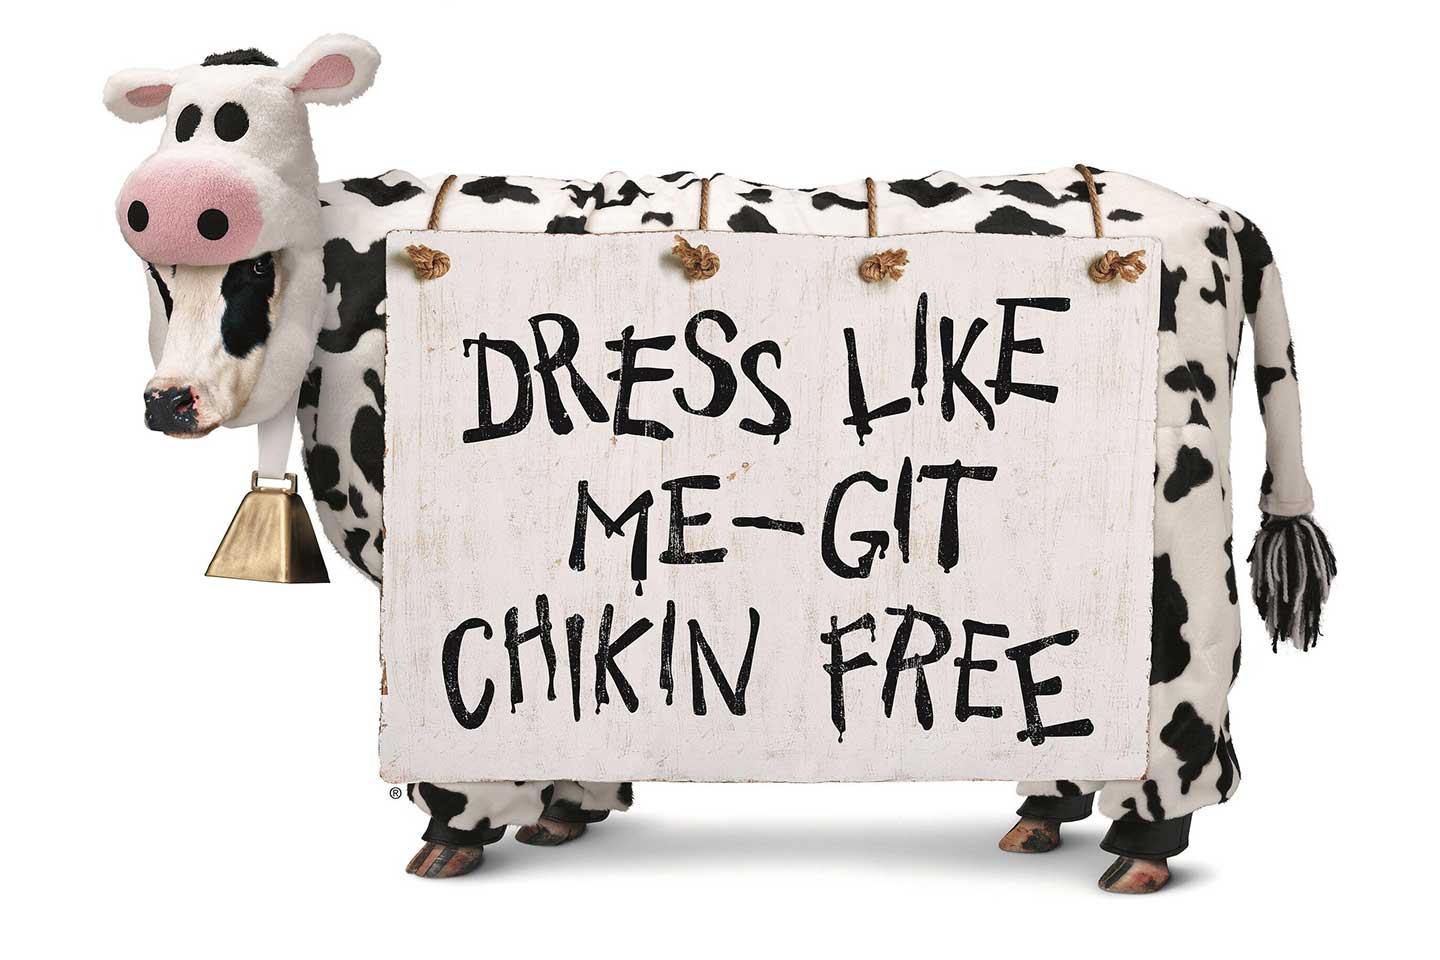 free-chick-fil-a-for-cow-appreciation-day-in-july-2022